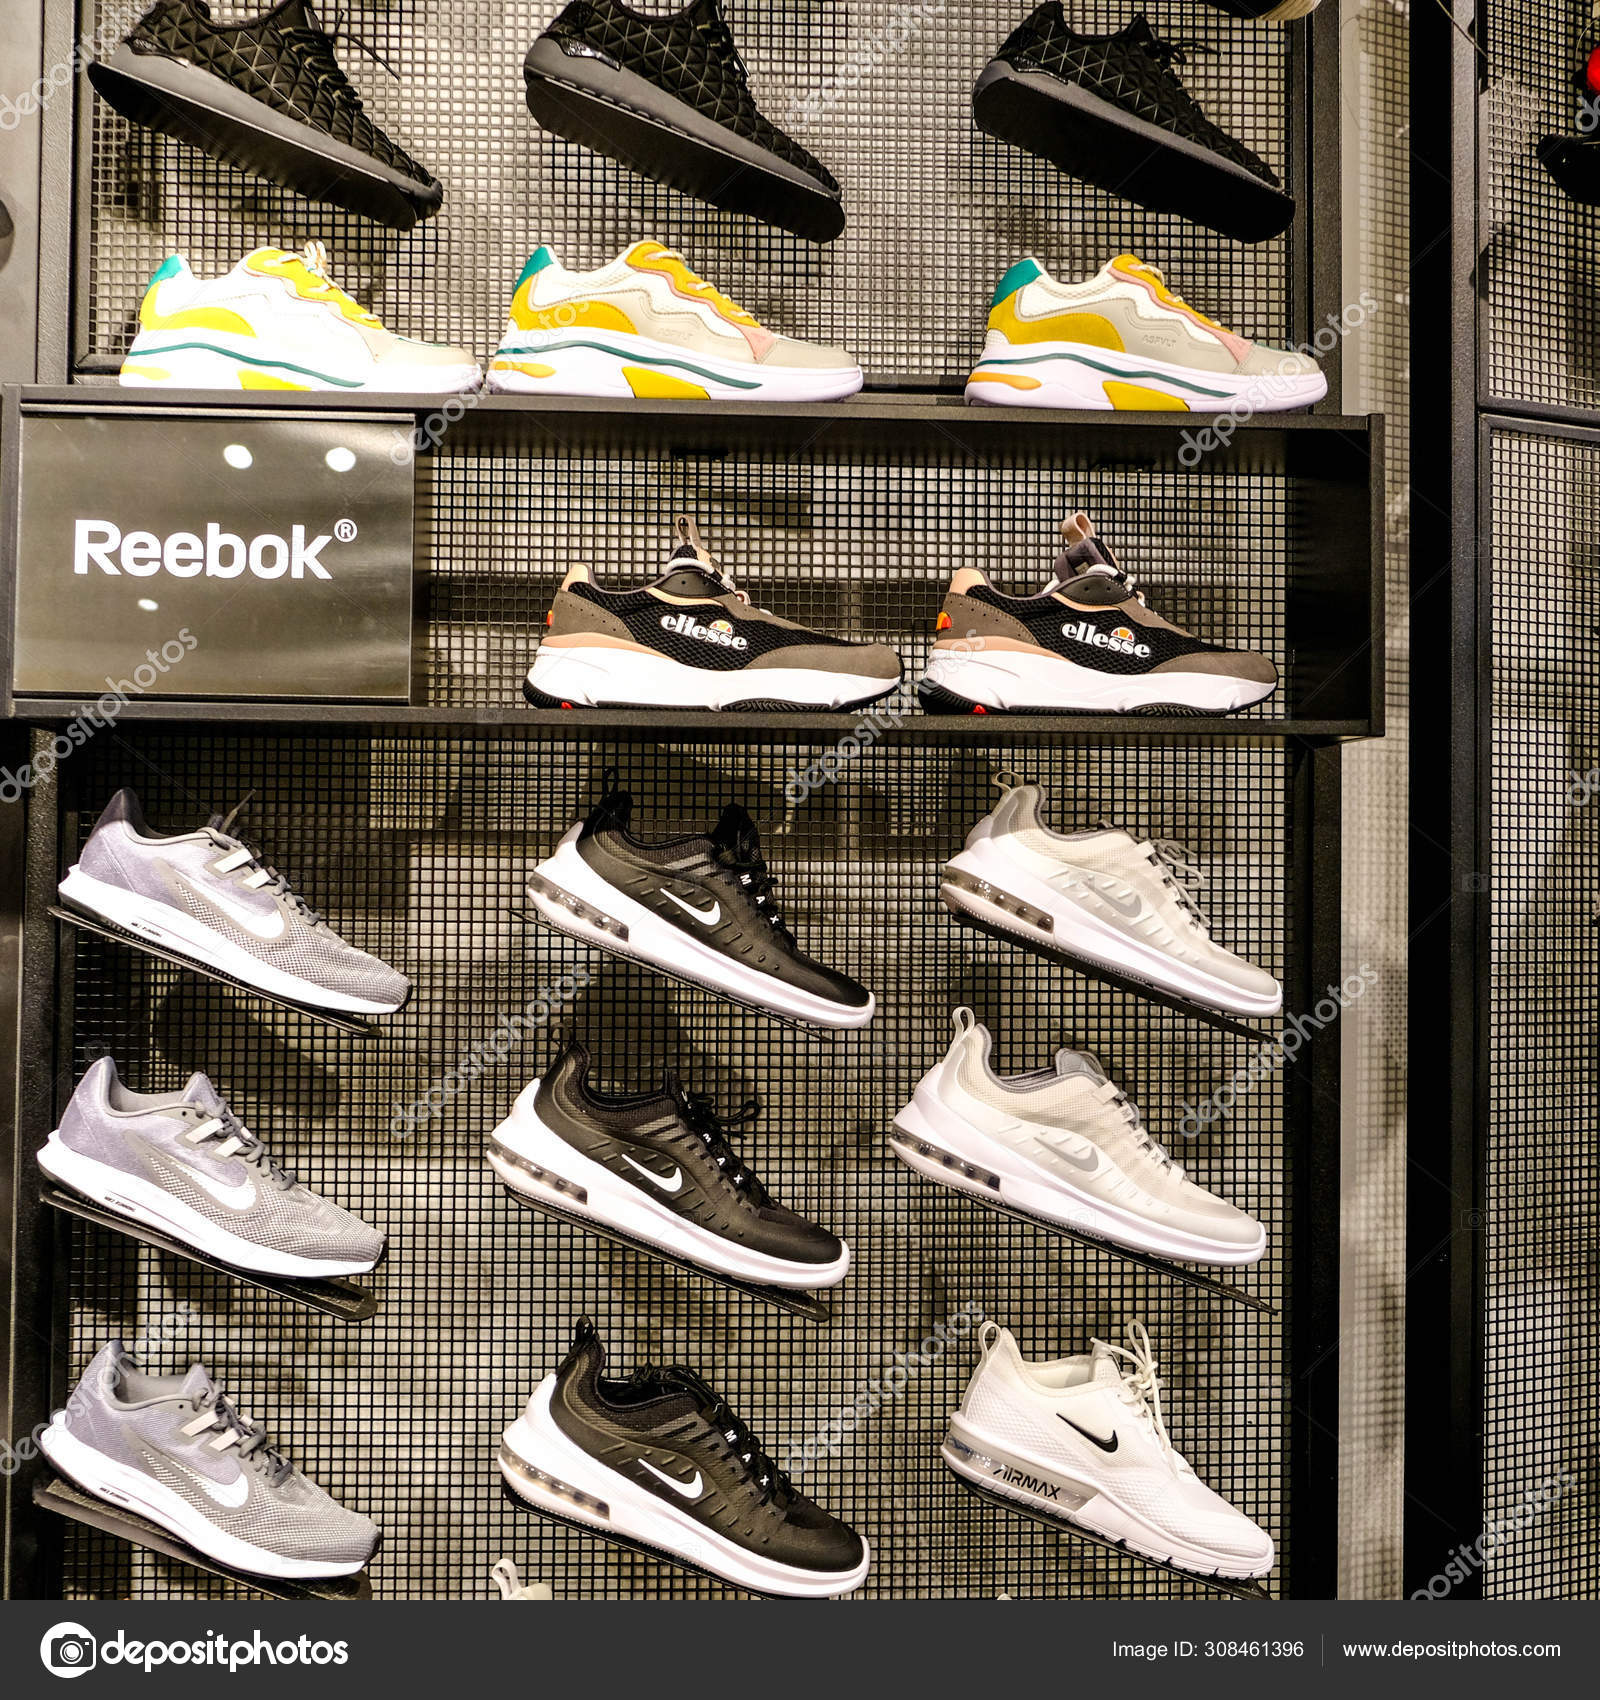 Reebok Display in a High Shop or Store – Editorial Photo richardmlee #308461396